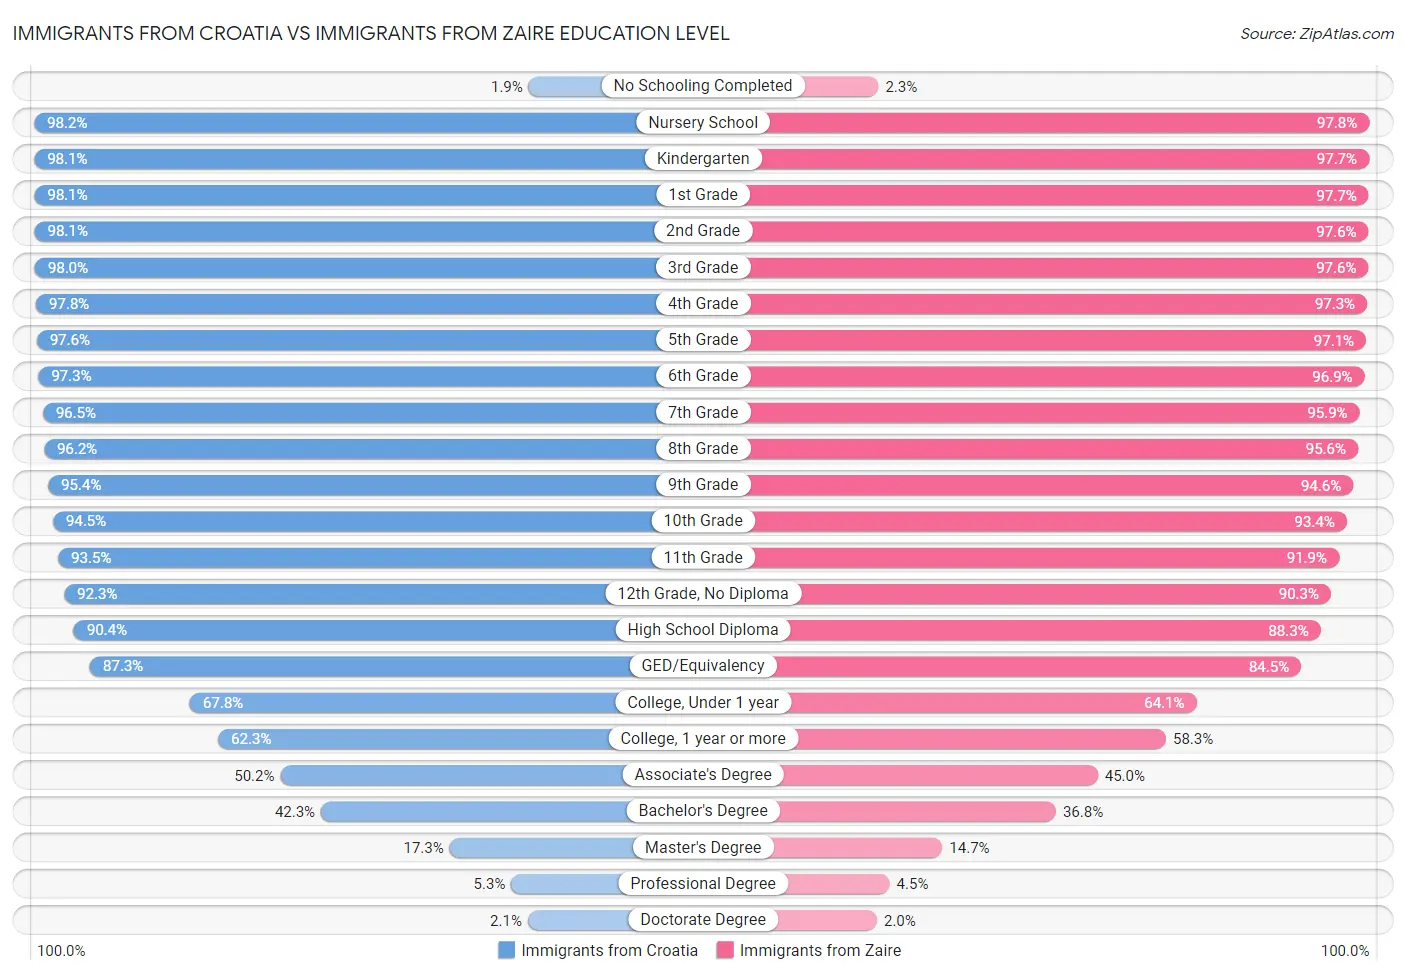 Immigrants from Croatia vs Immigrants from Zaire Education Level